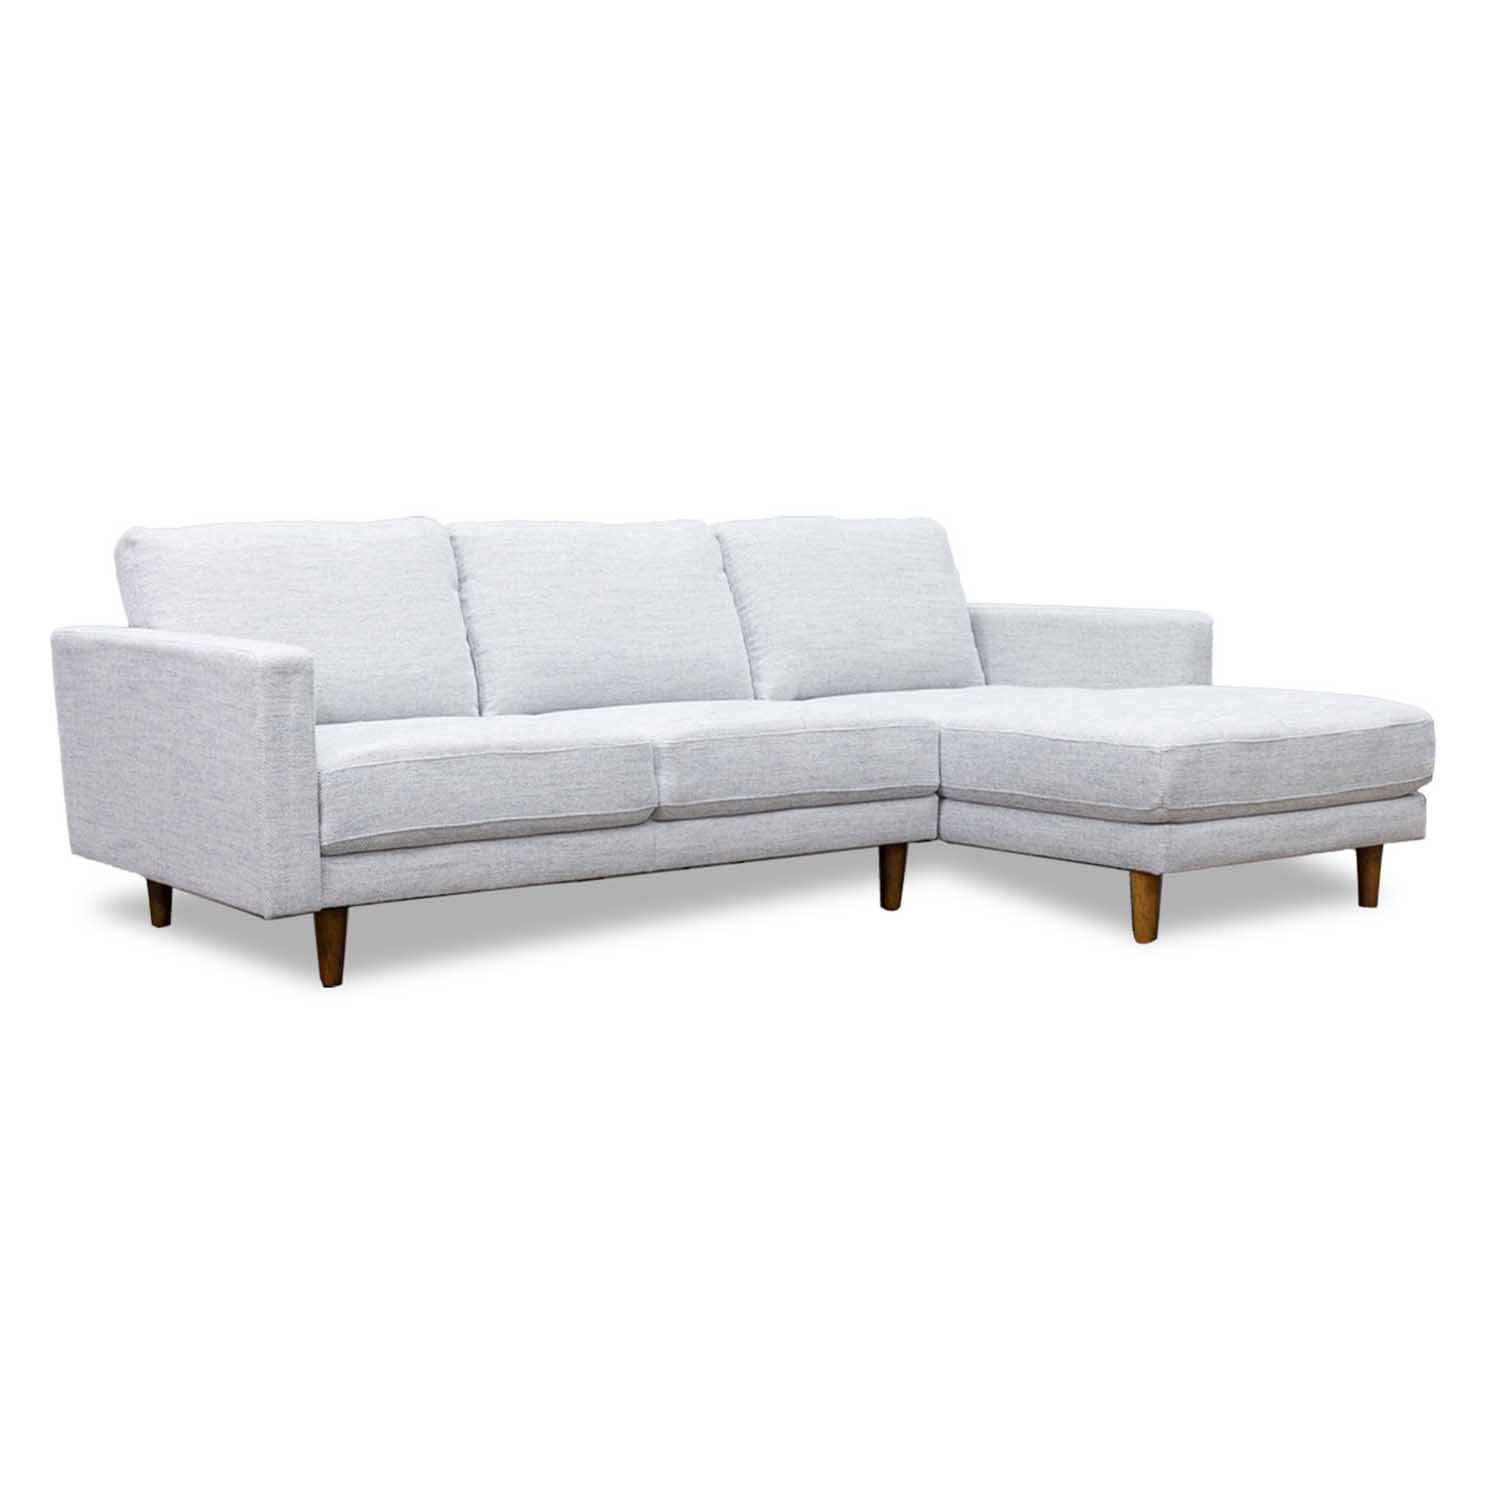 Capri Fabric Right Side Facing Chaise Lounge